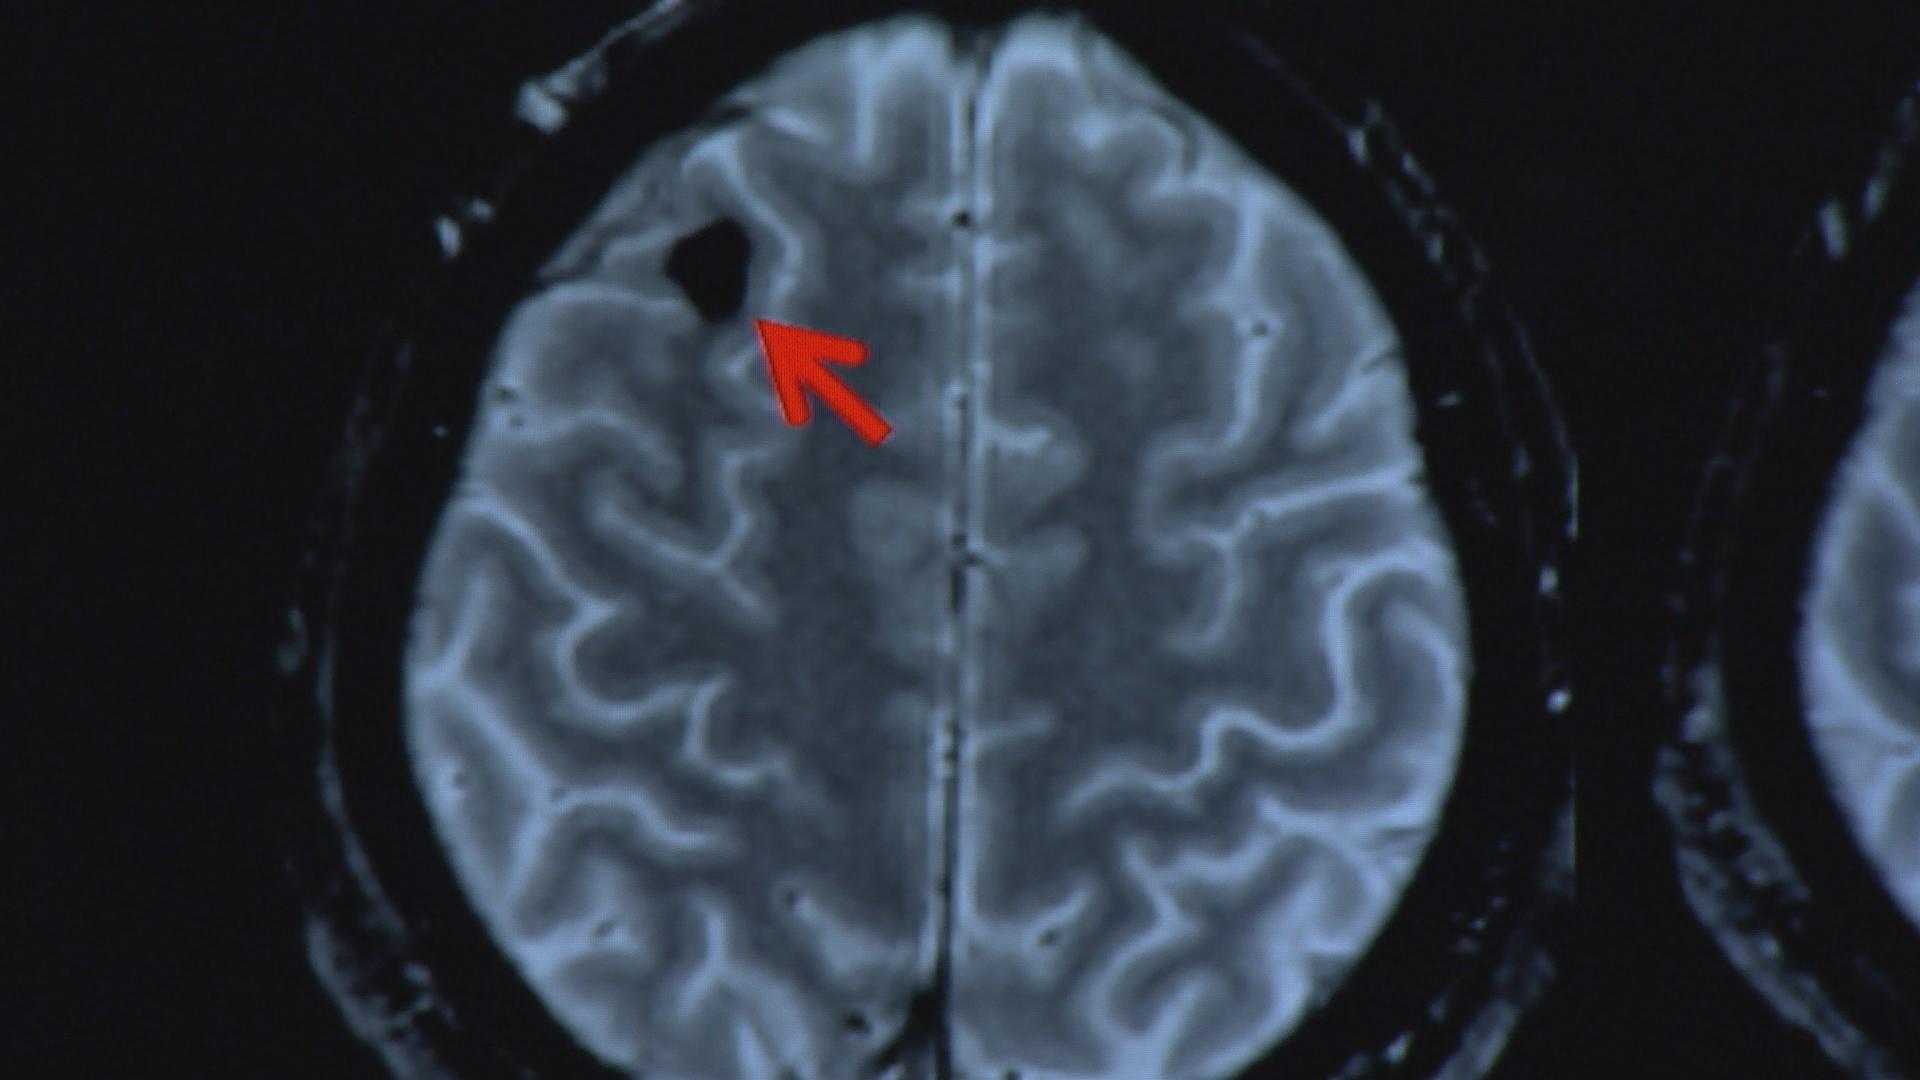 An MRI scan reveals a micro-bleed in the brain of a concussion patient. Image courtesy of Blake McHugh for KQED Science